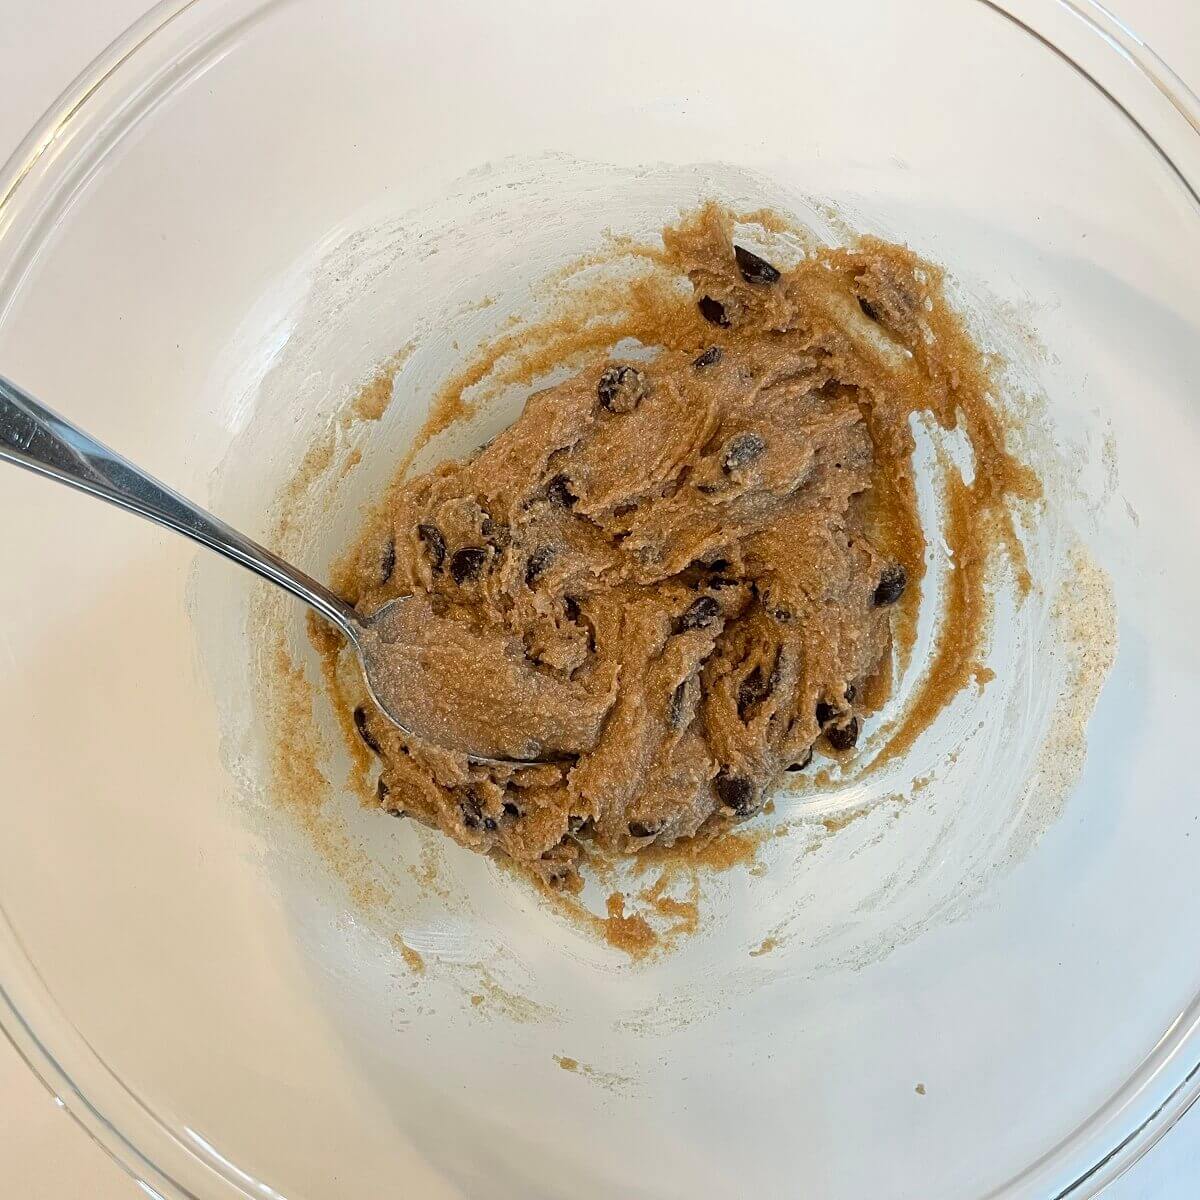 Vegan cookie dough made with coconut oil in a glass mixing bowl.